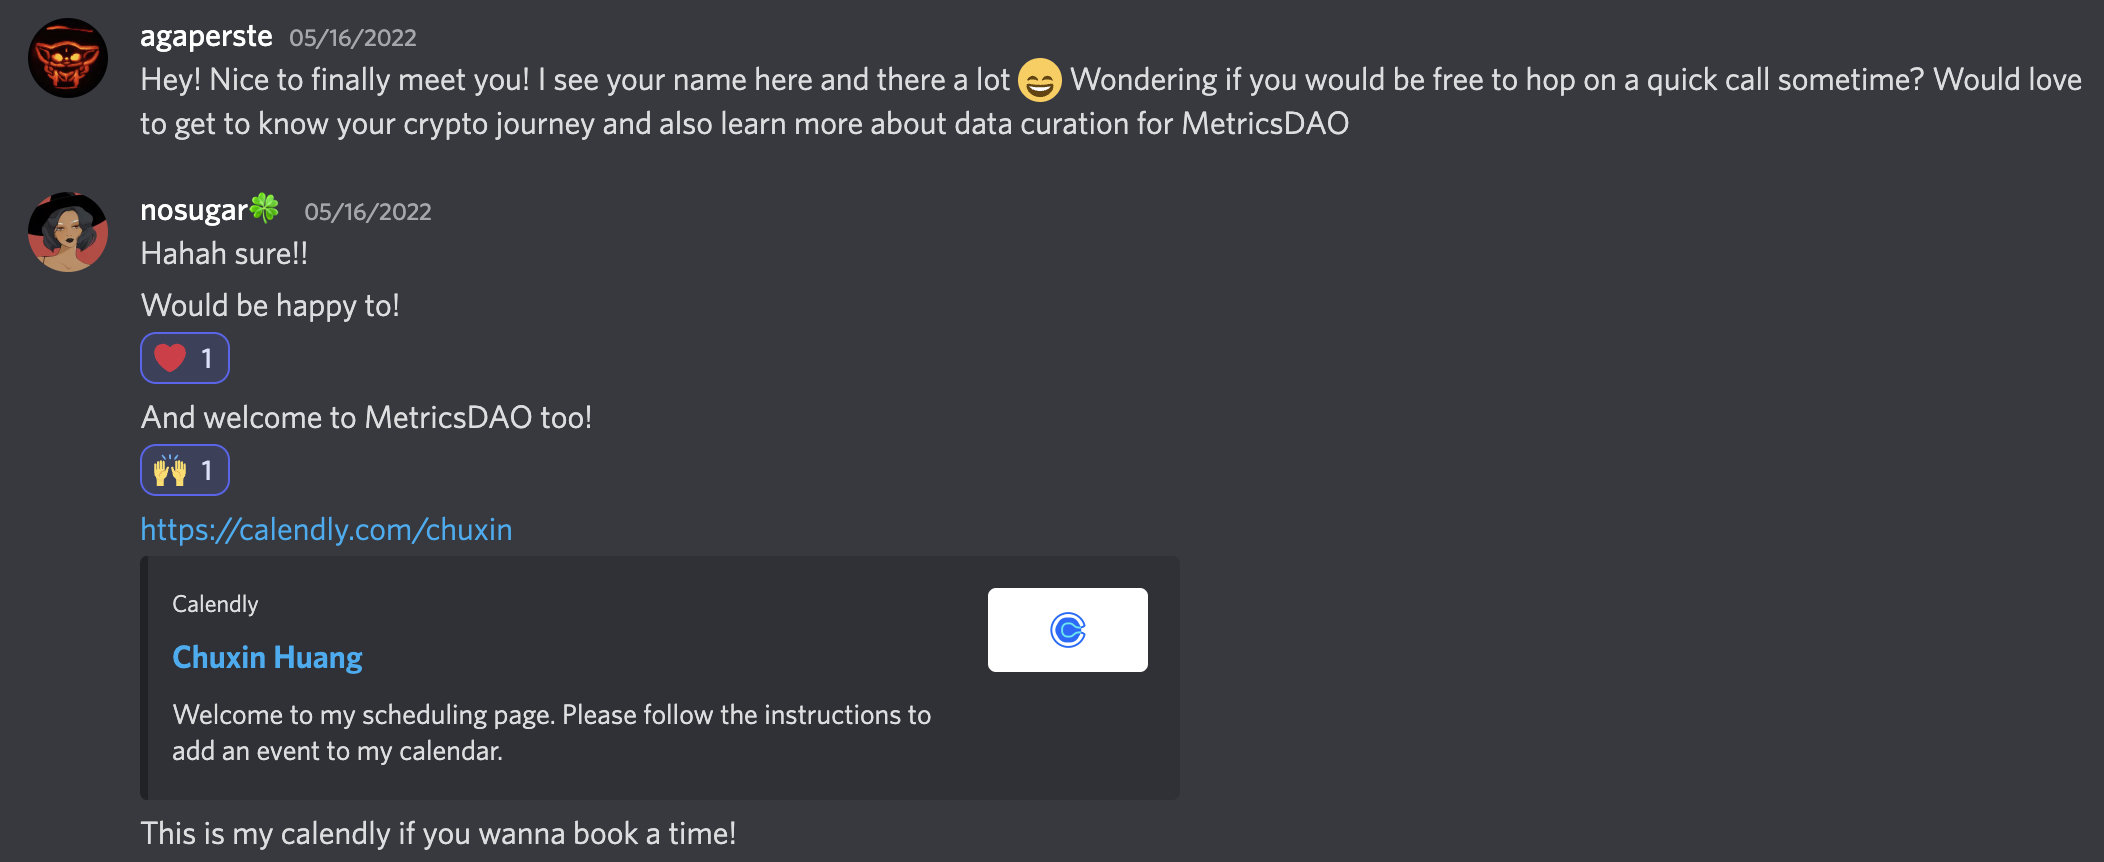 My first Discord DM with Chuxin